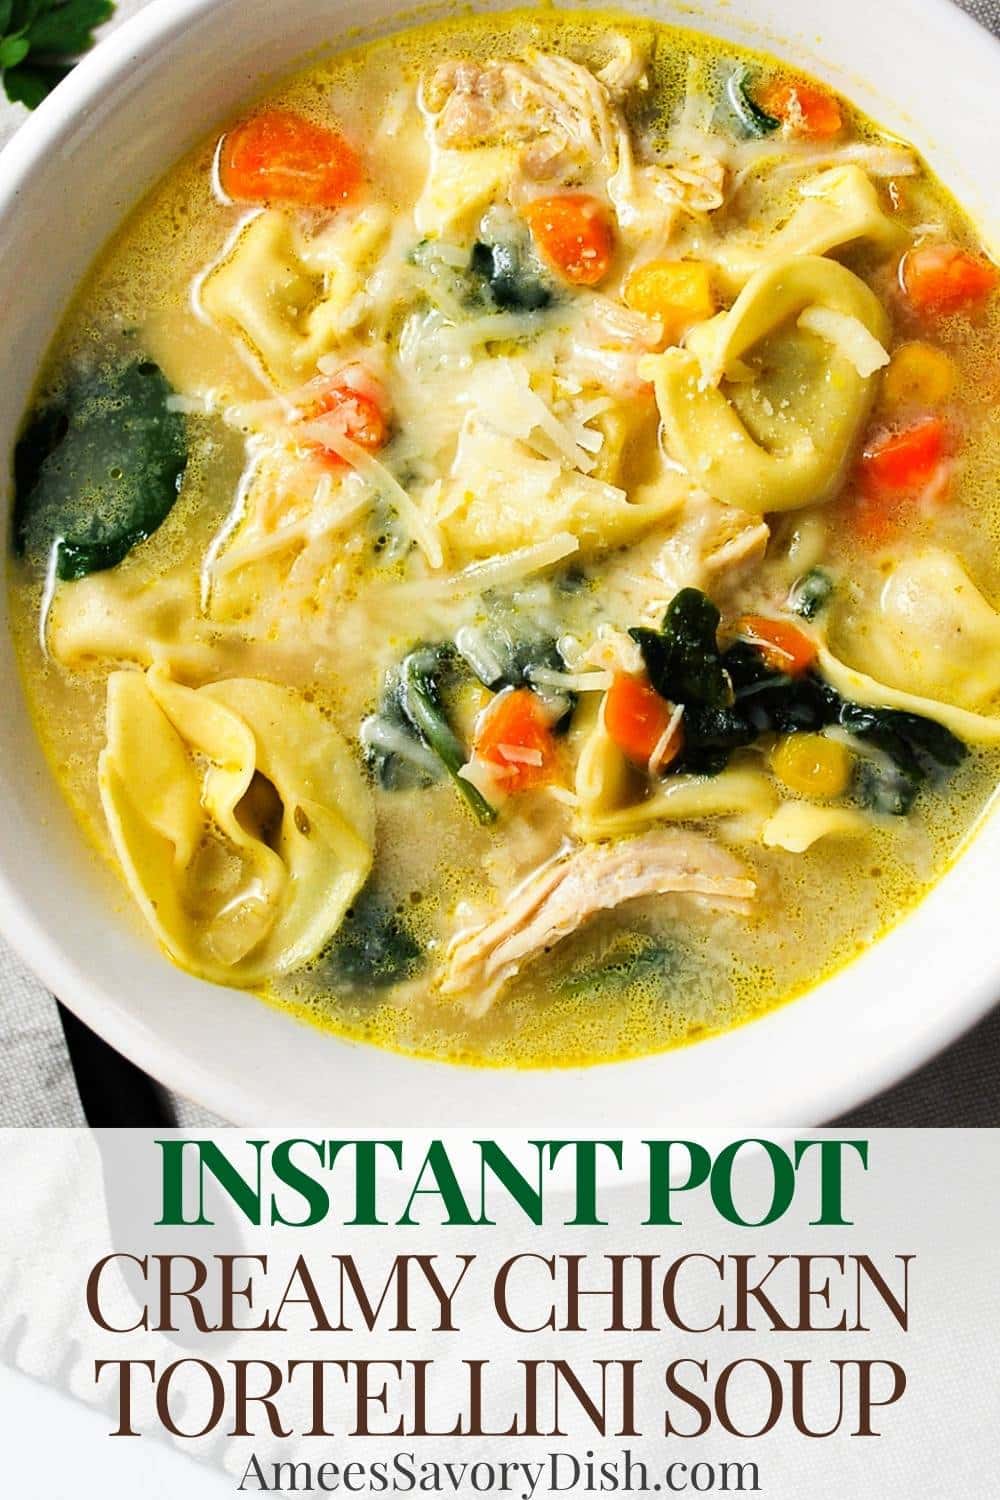 This Creamy Instant Pot Tortellini Soup is made with savory veggies, cheese tortellini, and tender chicken in an irresistibly creamy broth. via @Ameessavorydish